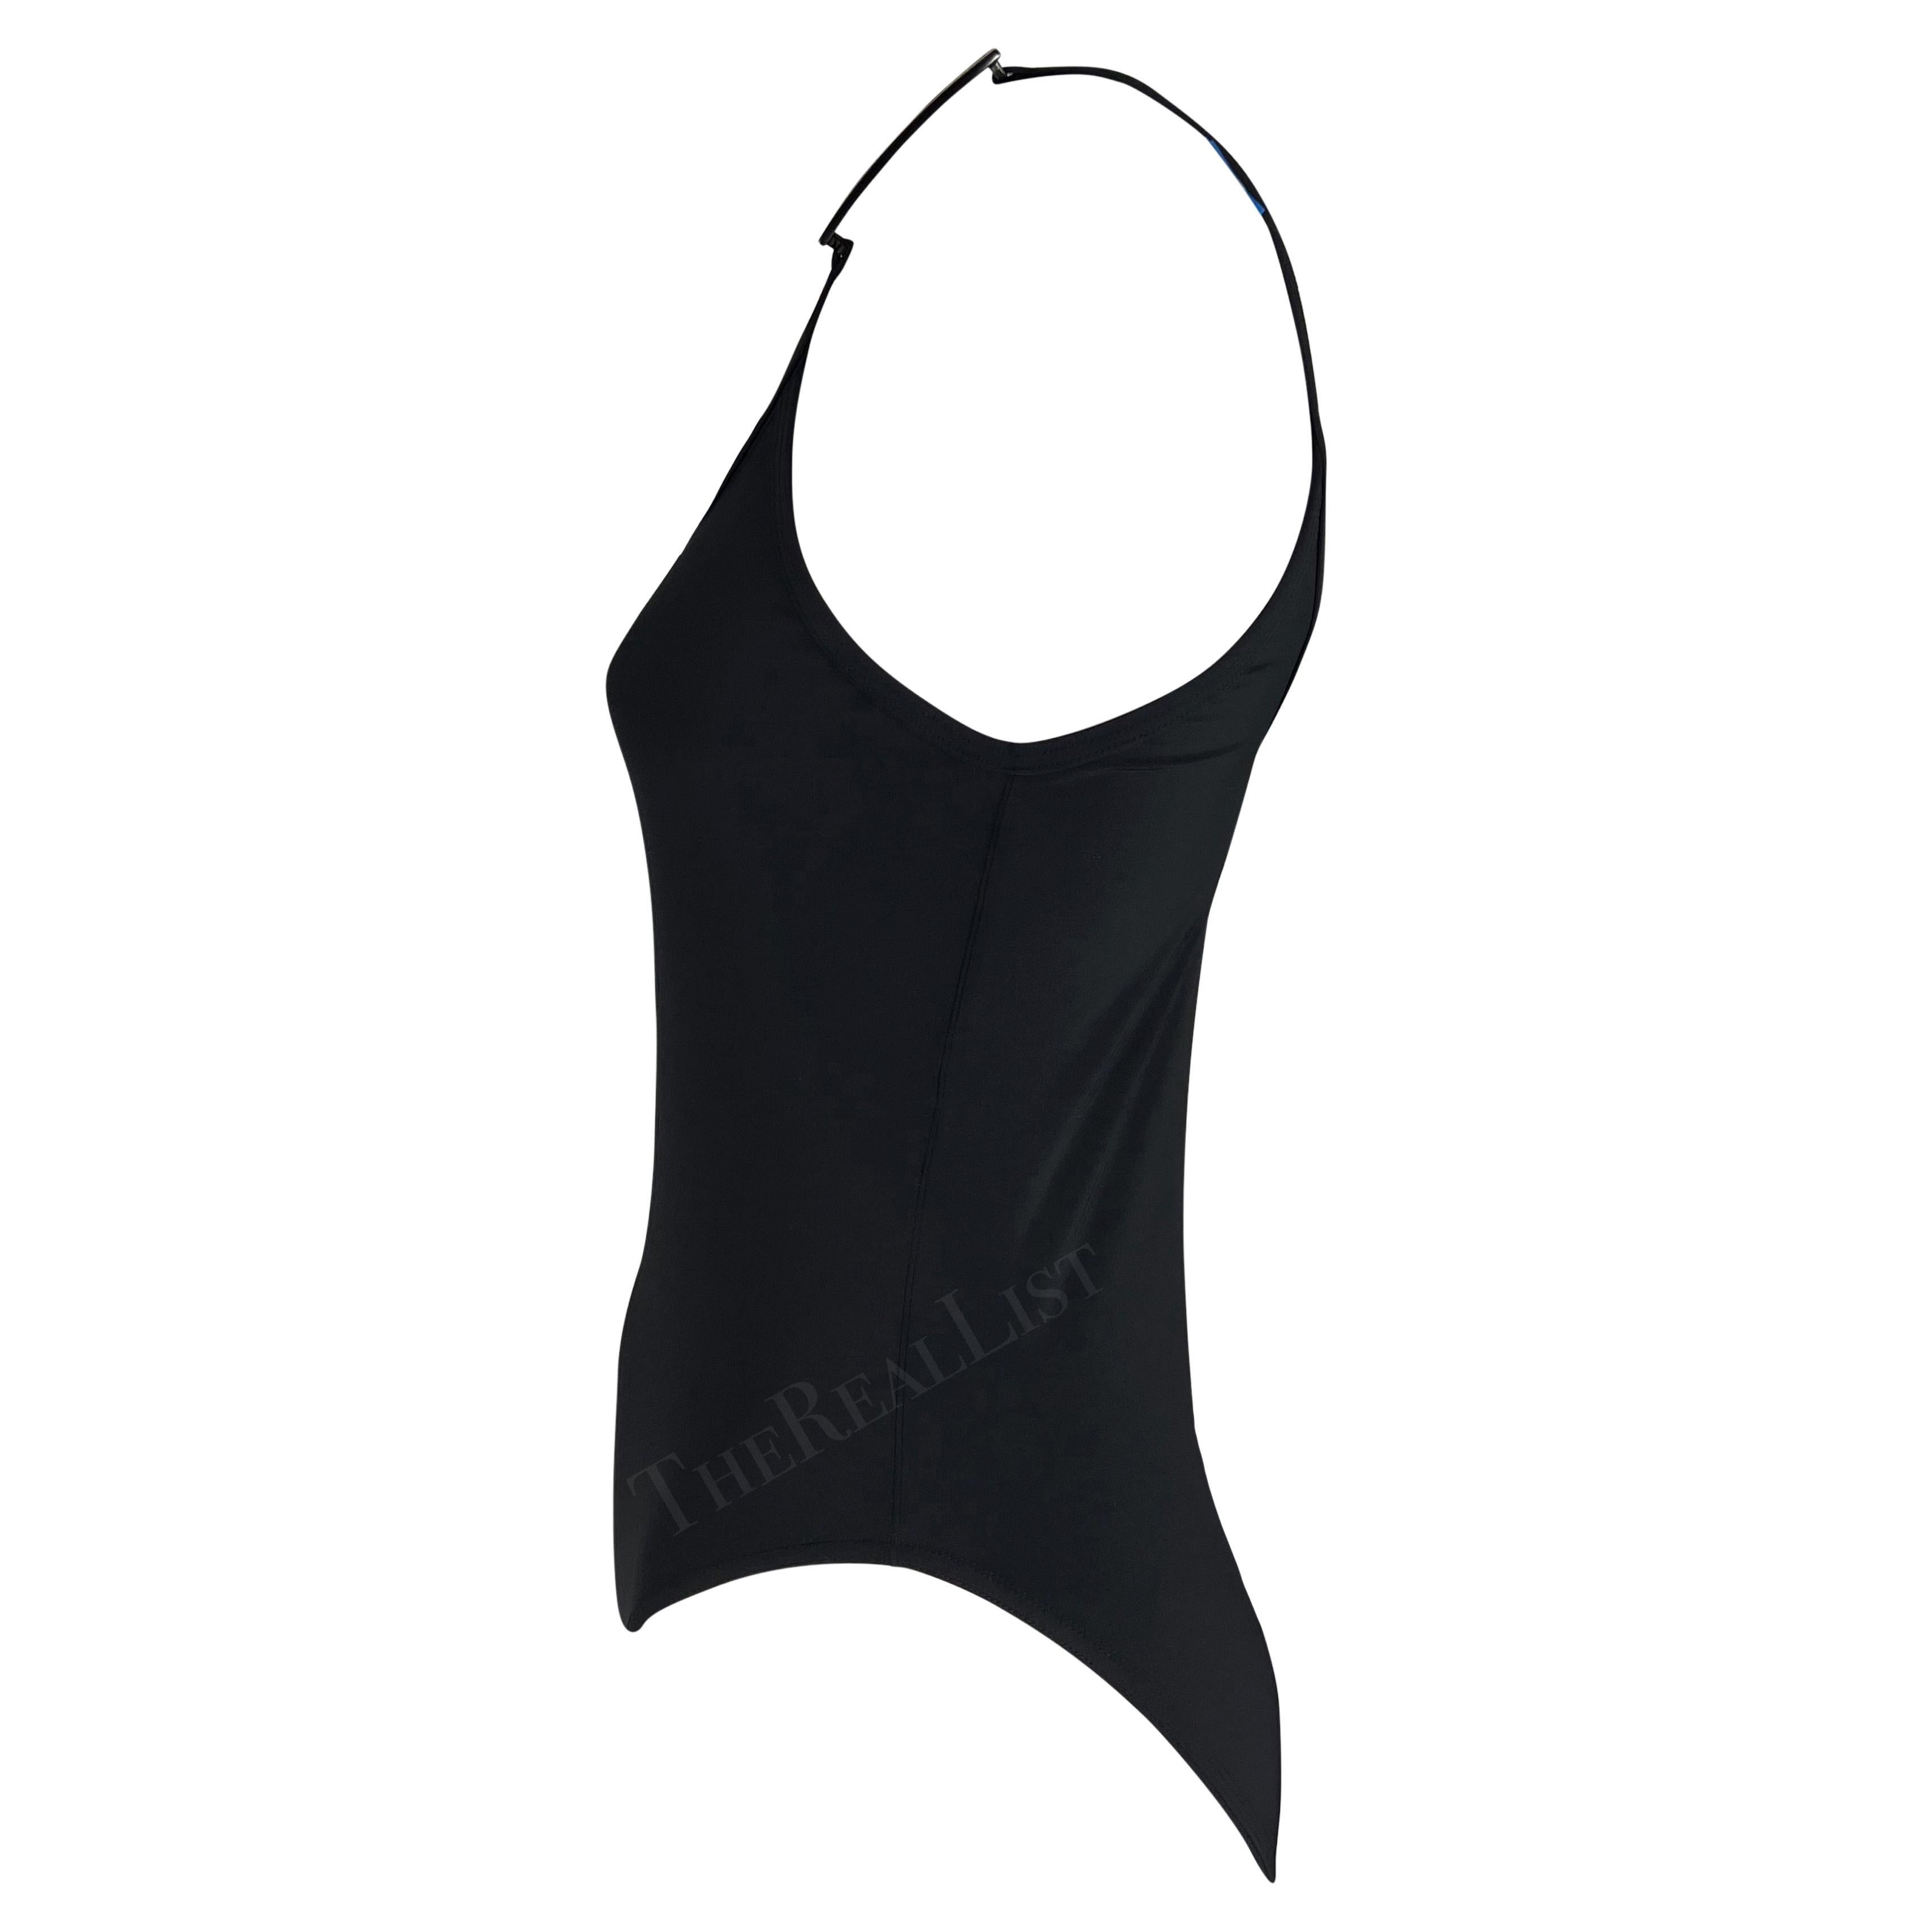 S/S 1998 Gucci by Tom Ford Black 'G' Buckle Logo One Piece Swimsuit Bodysuit In Excellent Condition For Sale In West Hollywood, CA